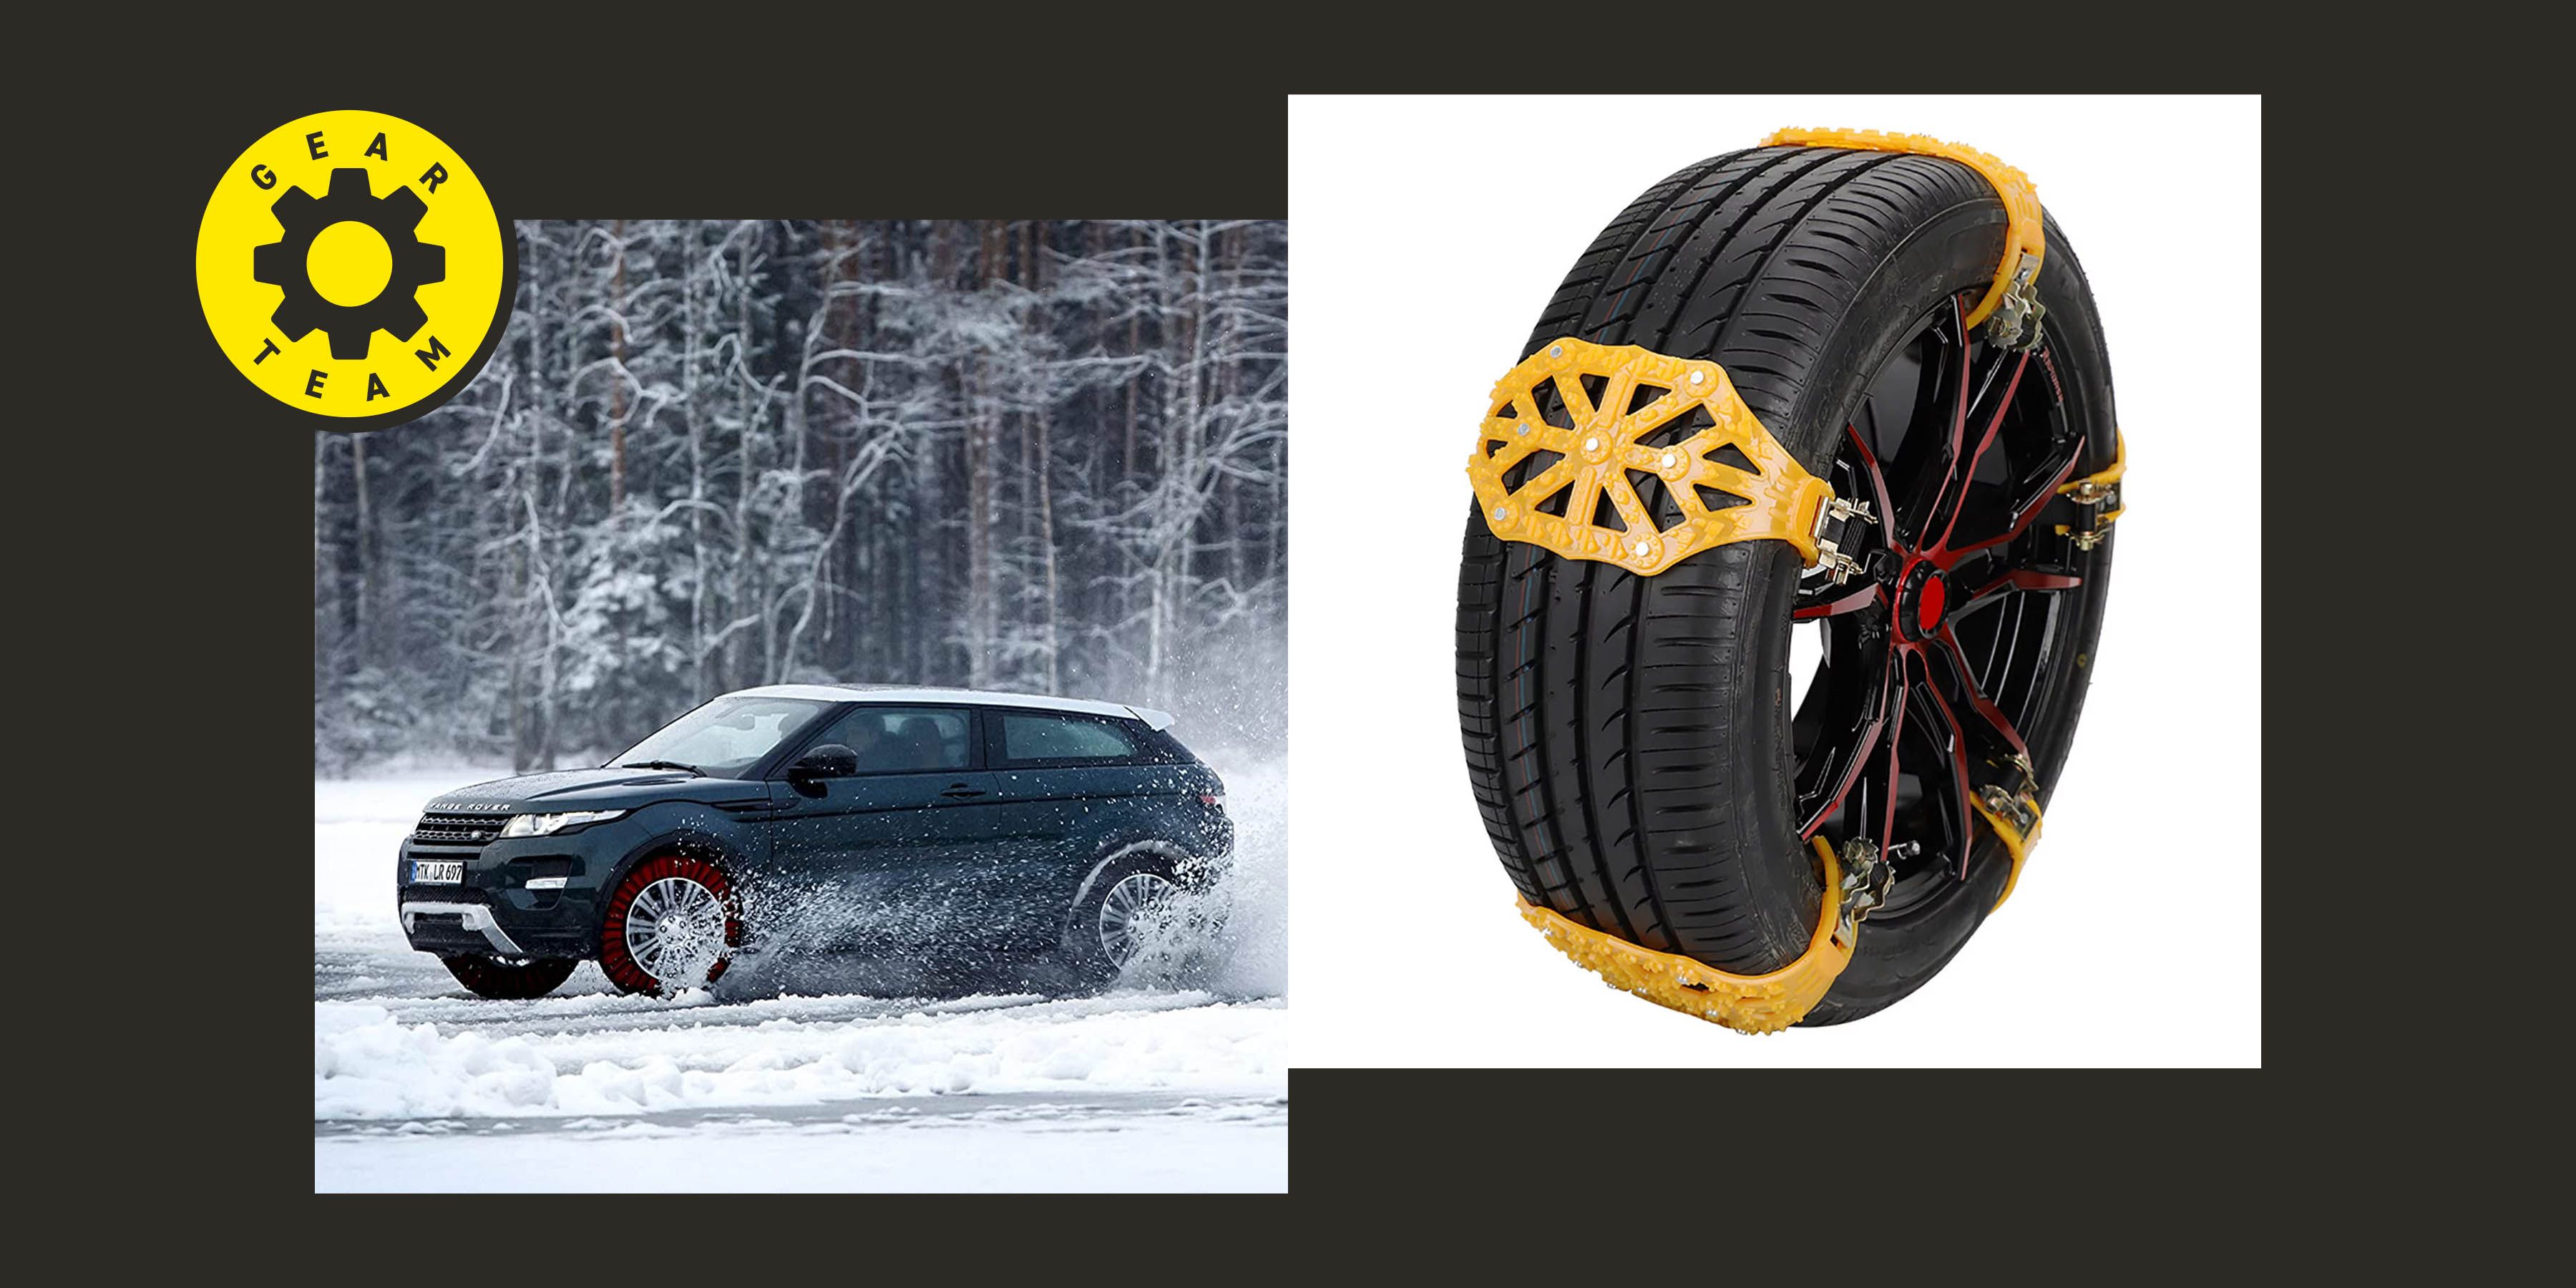 Big Ant Snow Chain Anti-Skid Tire Snow Chains,Emergency Traction Car Snow  Tyre Chains Universal for Light Truck/SUV Tire Chain Width